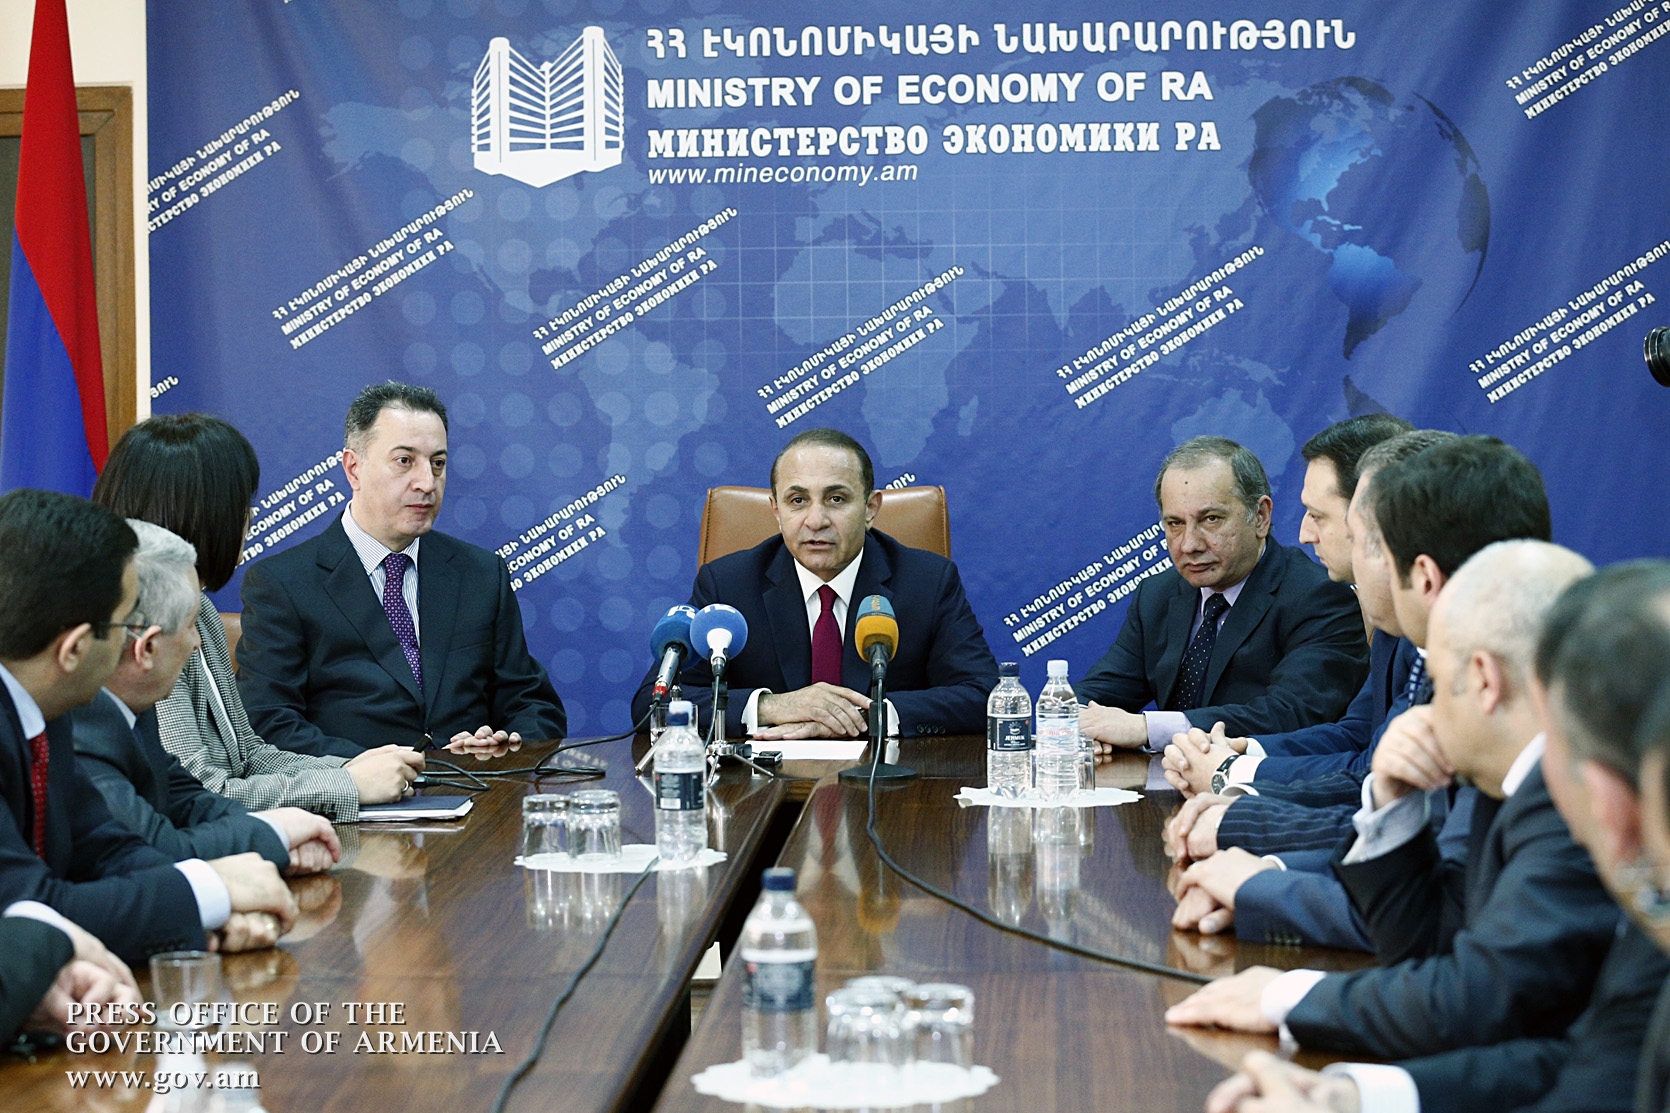 Armenia's PM introduces newly appointed Minister of Economy to ministry's staff